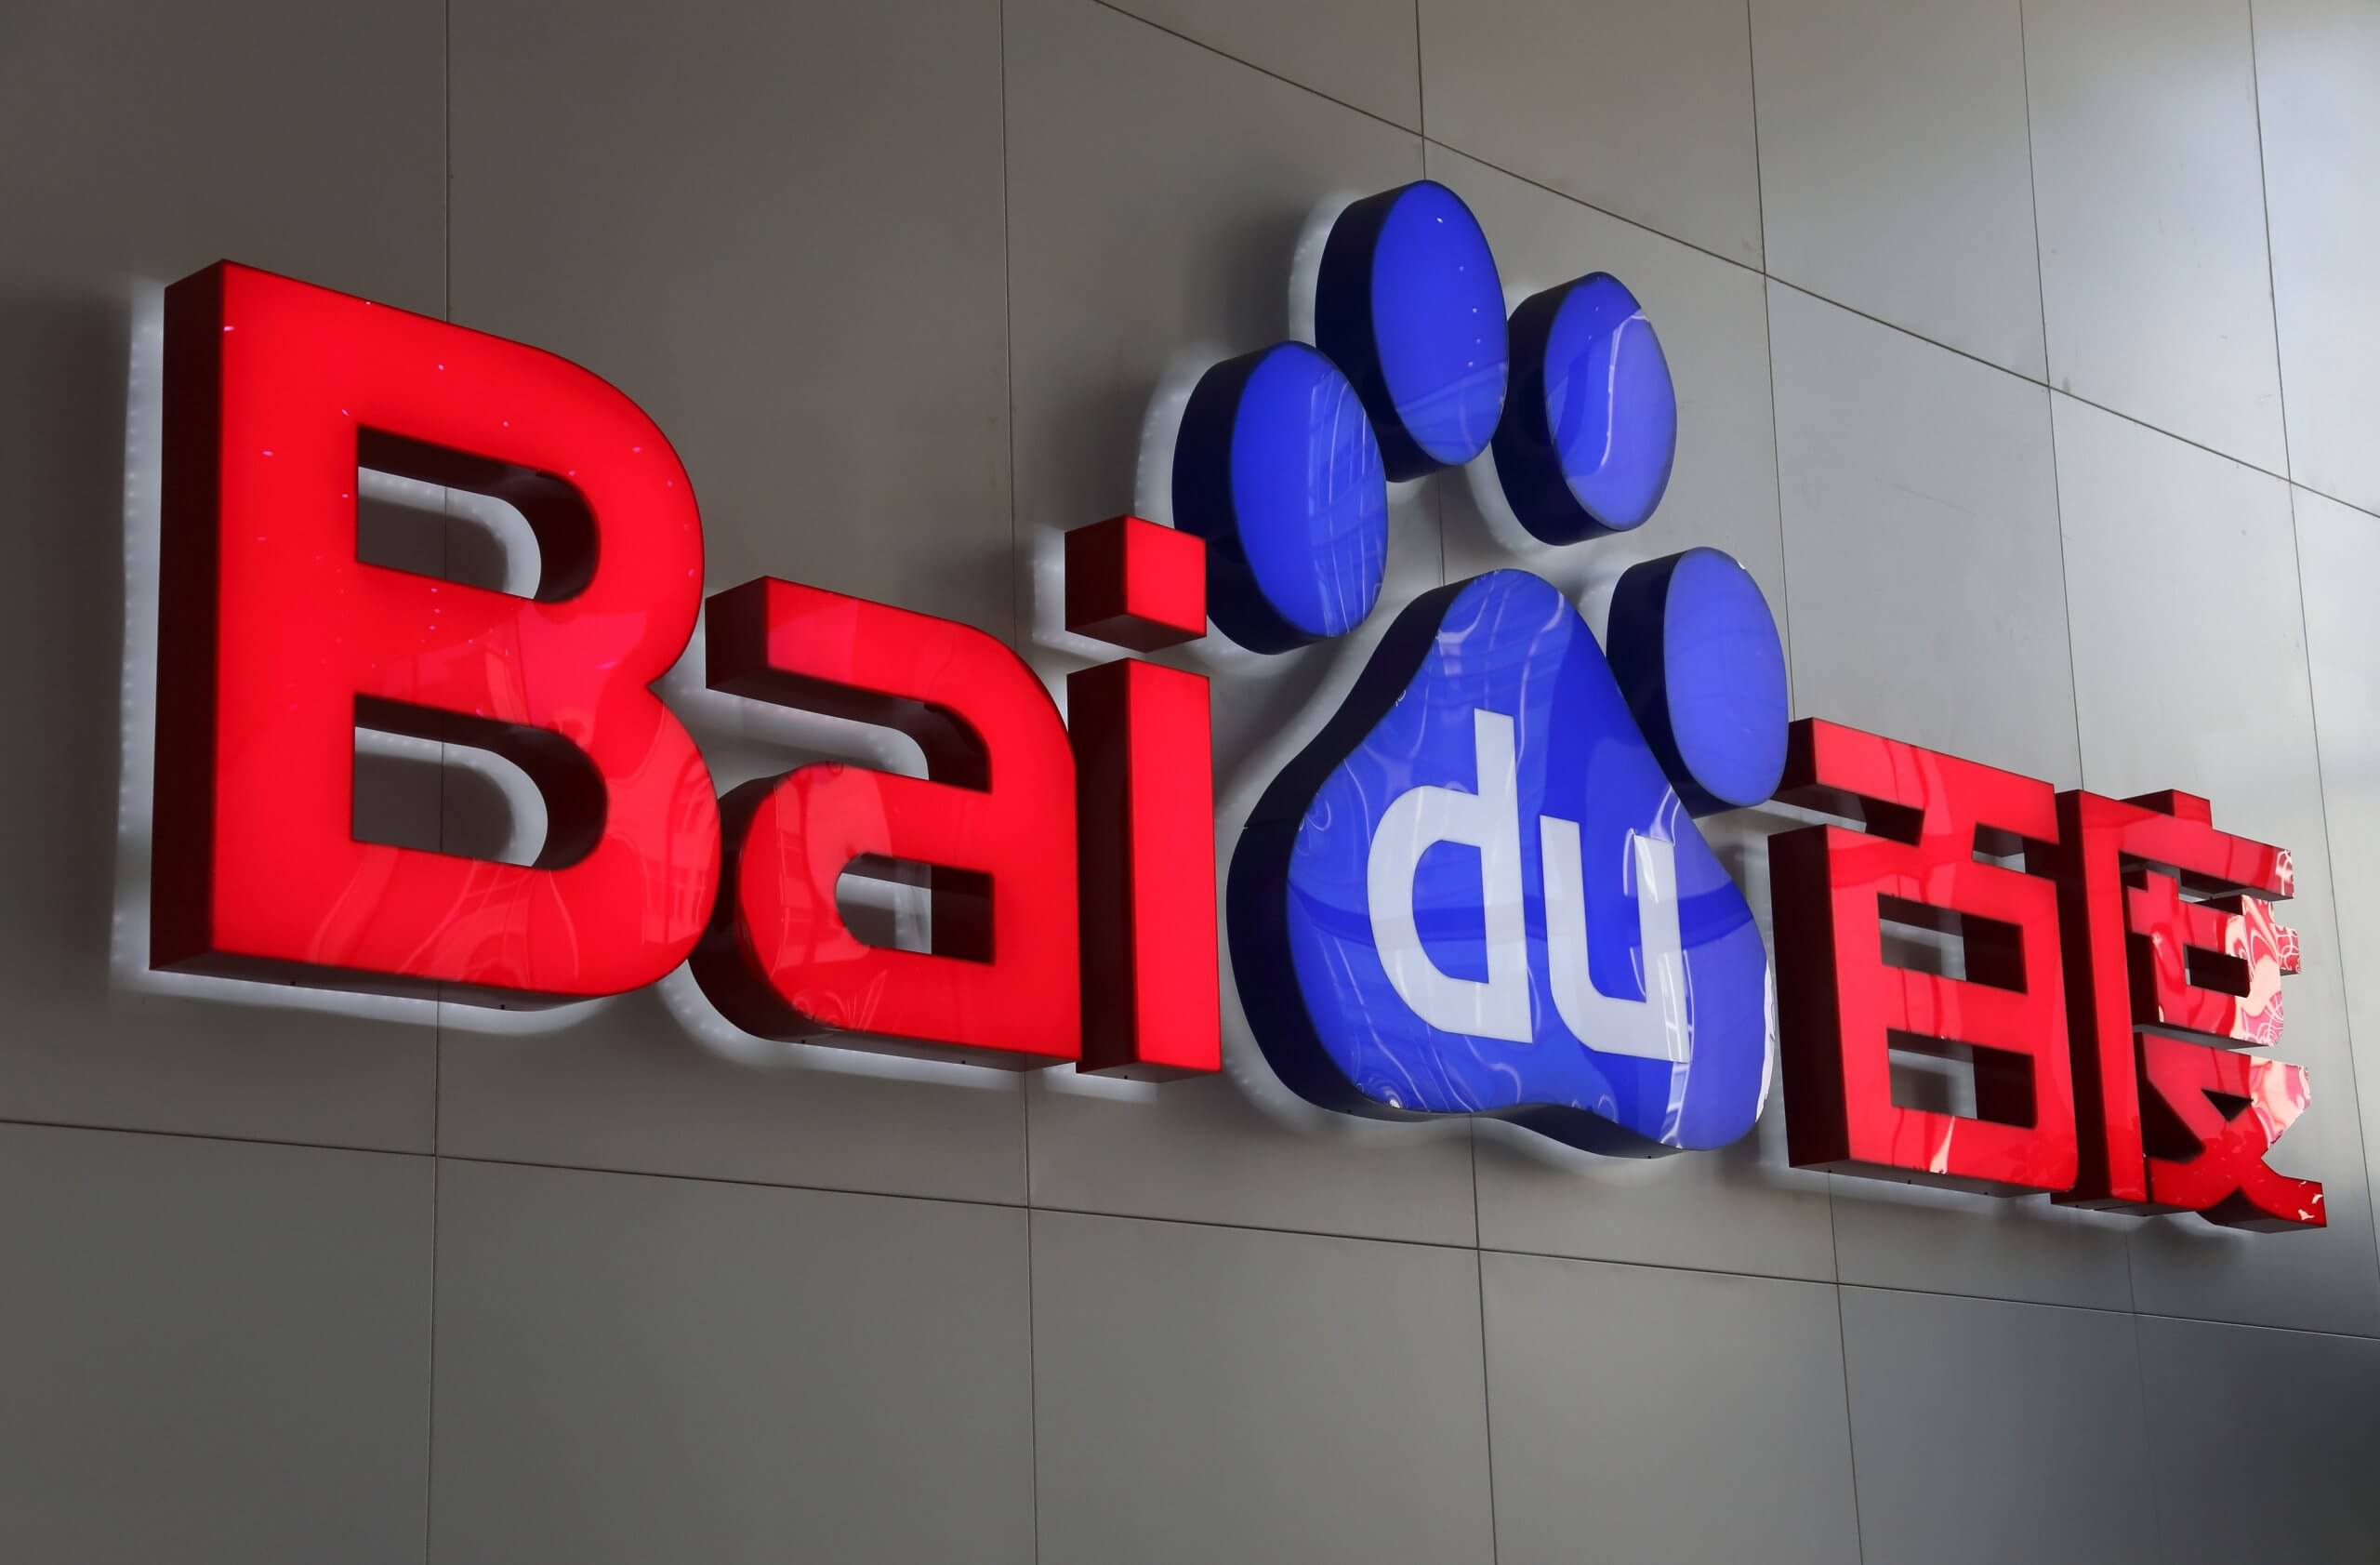 Chinese firm Baidu planning to create an electric vehicle company with emerging technology